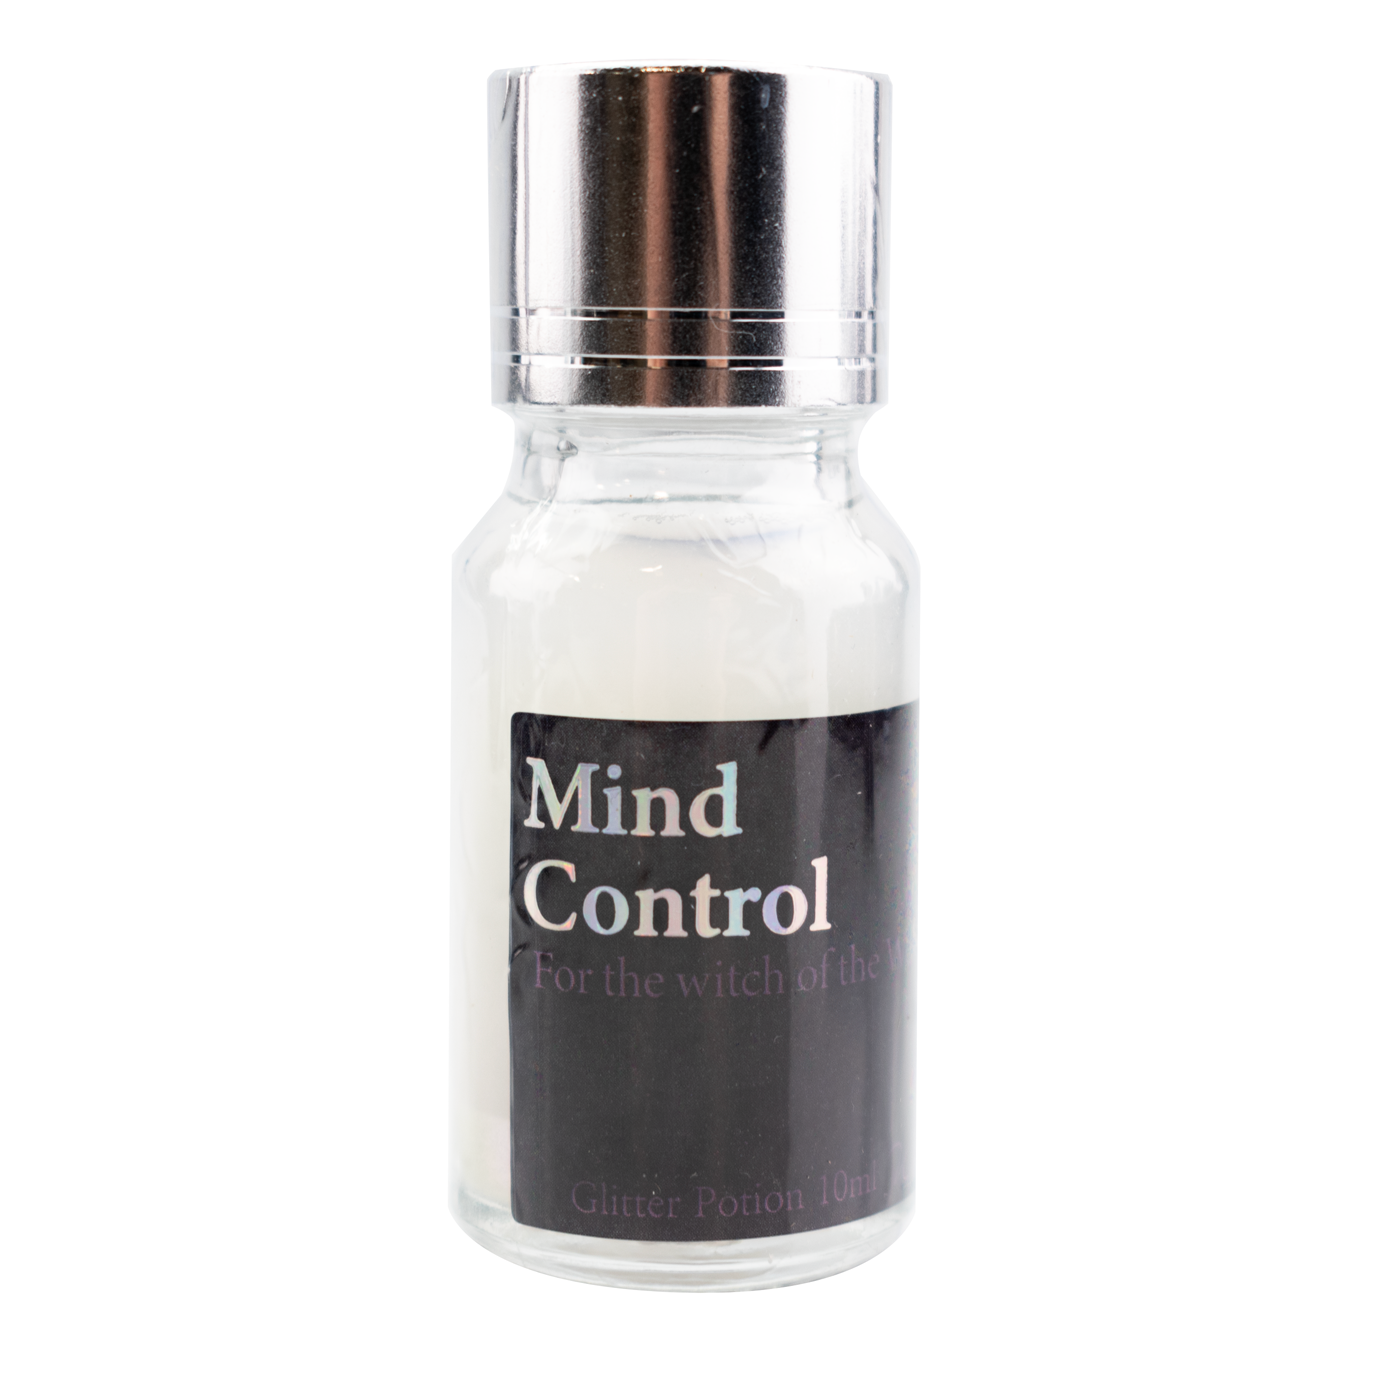 Wearingeul - Becoming Witch - 10ml Glitter Potion - Mind Control